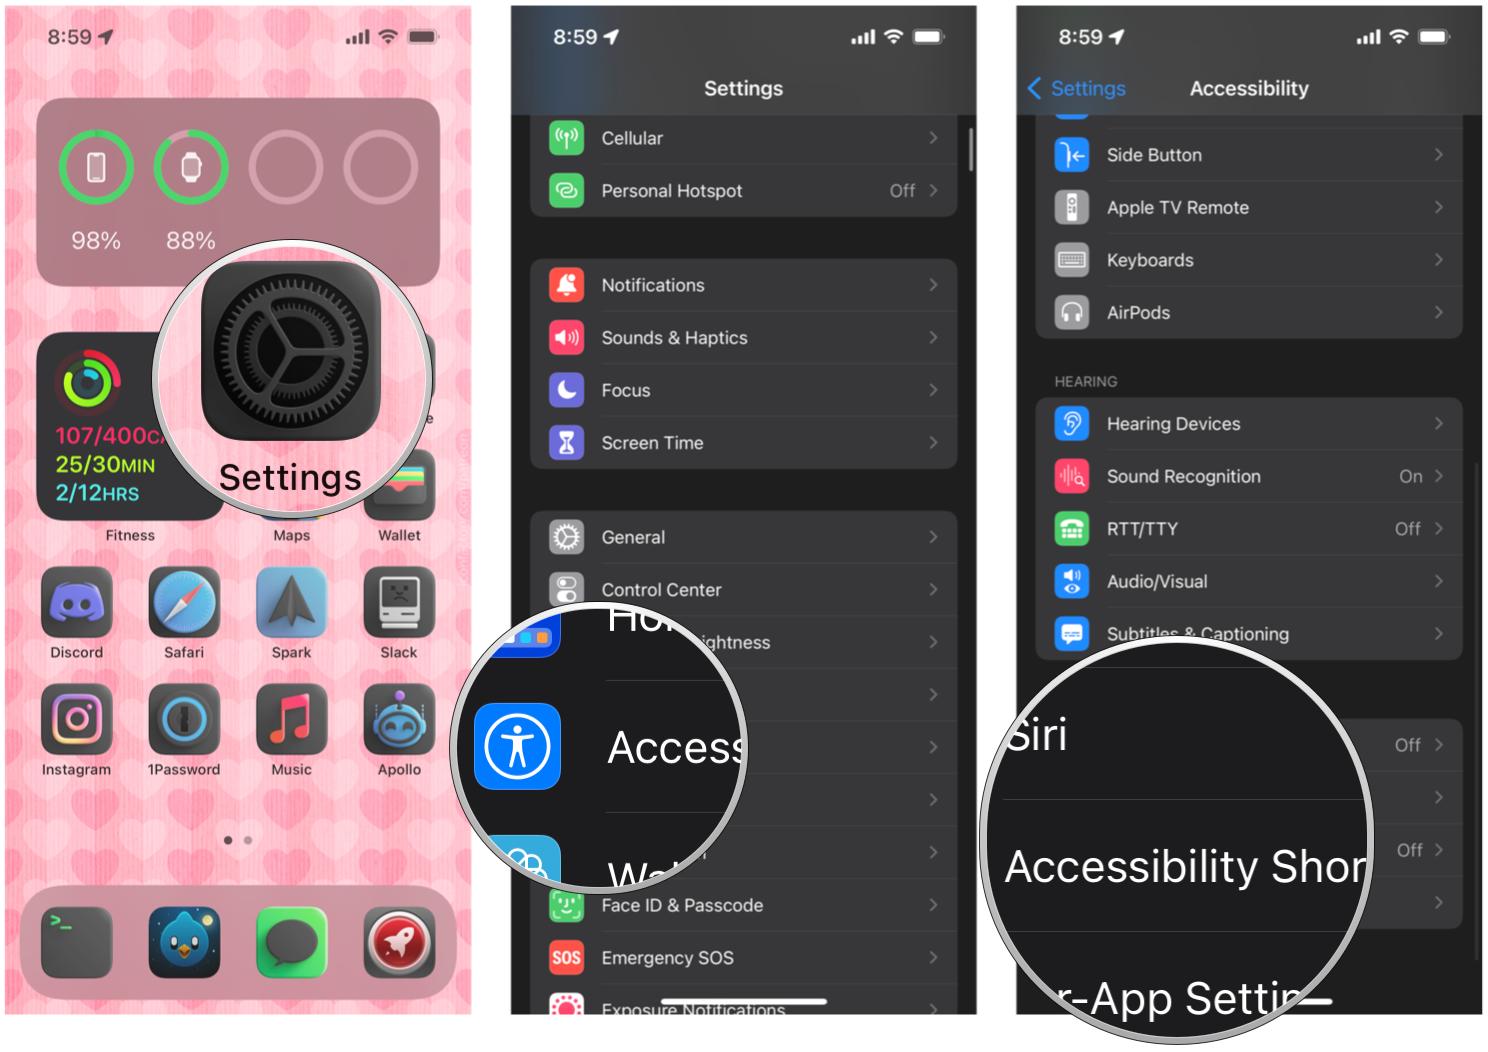 How to enable and use the Accessibility Shortcut on iPhone by showing: Launch Settings, tap Accessibility, tap Accessibility Shortcut at the bottom